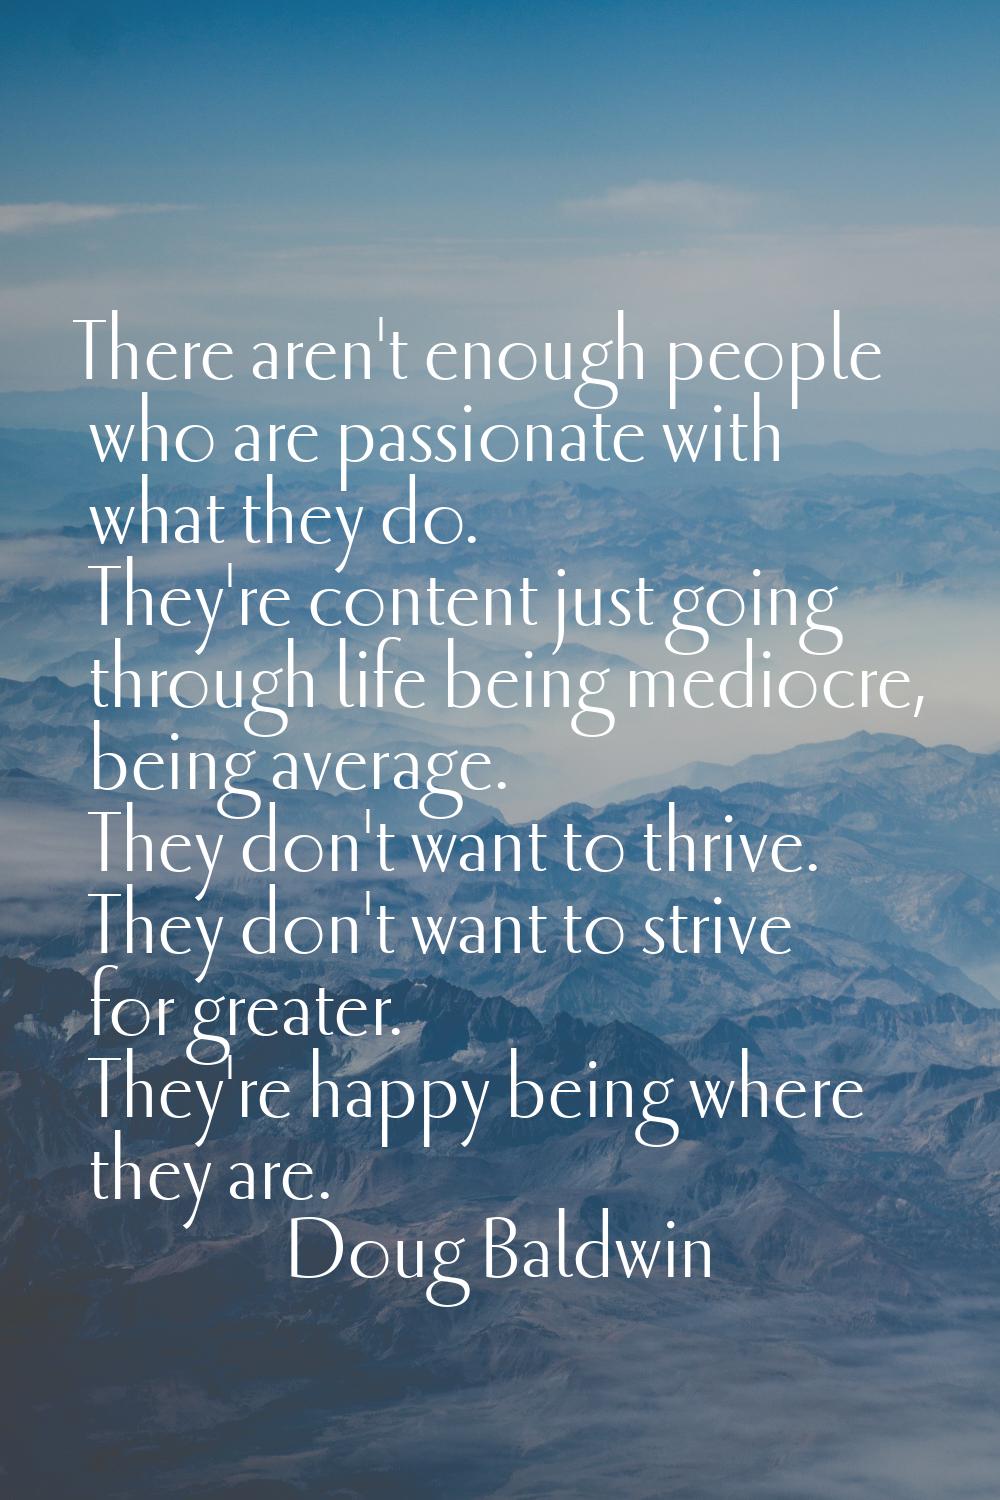 There aren't enough people who are passionate with what they do. They're content just going through